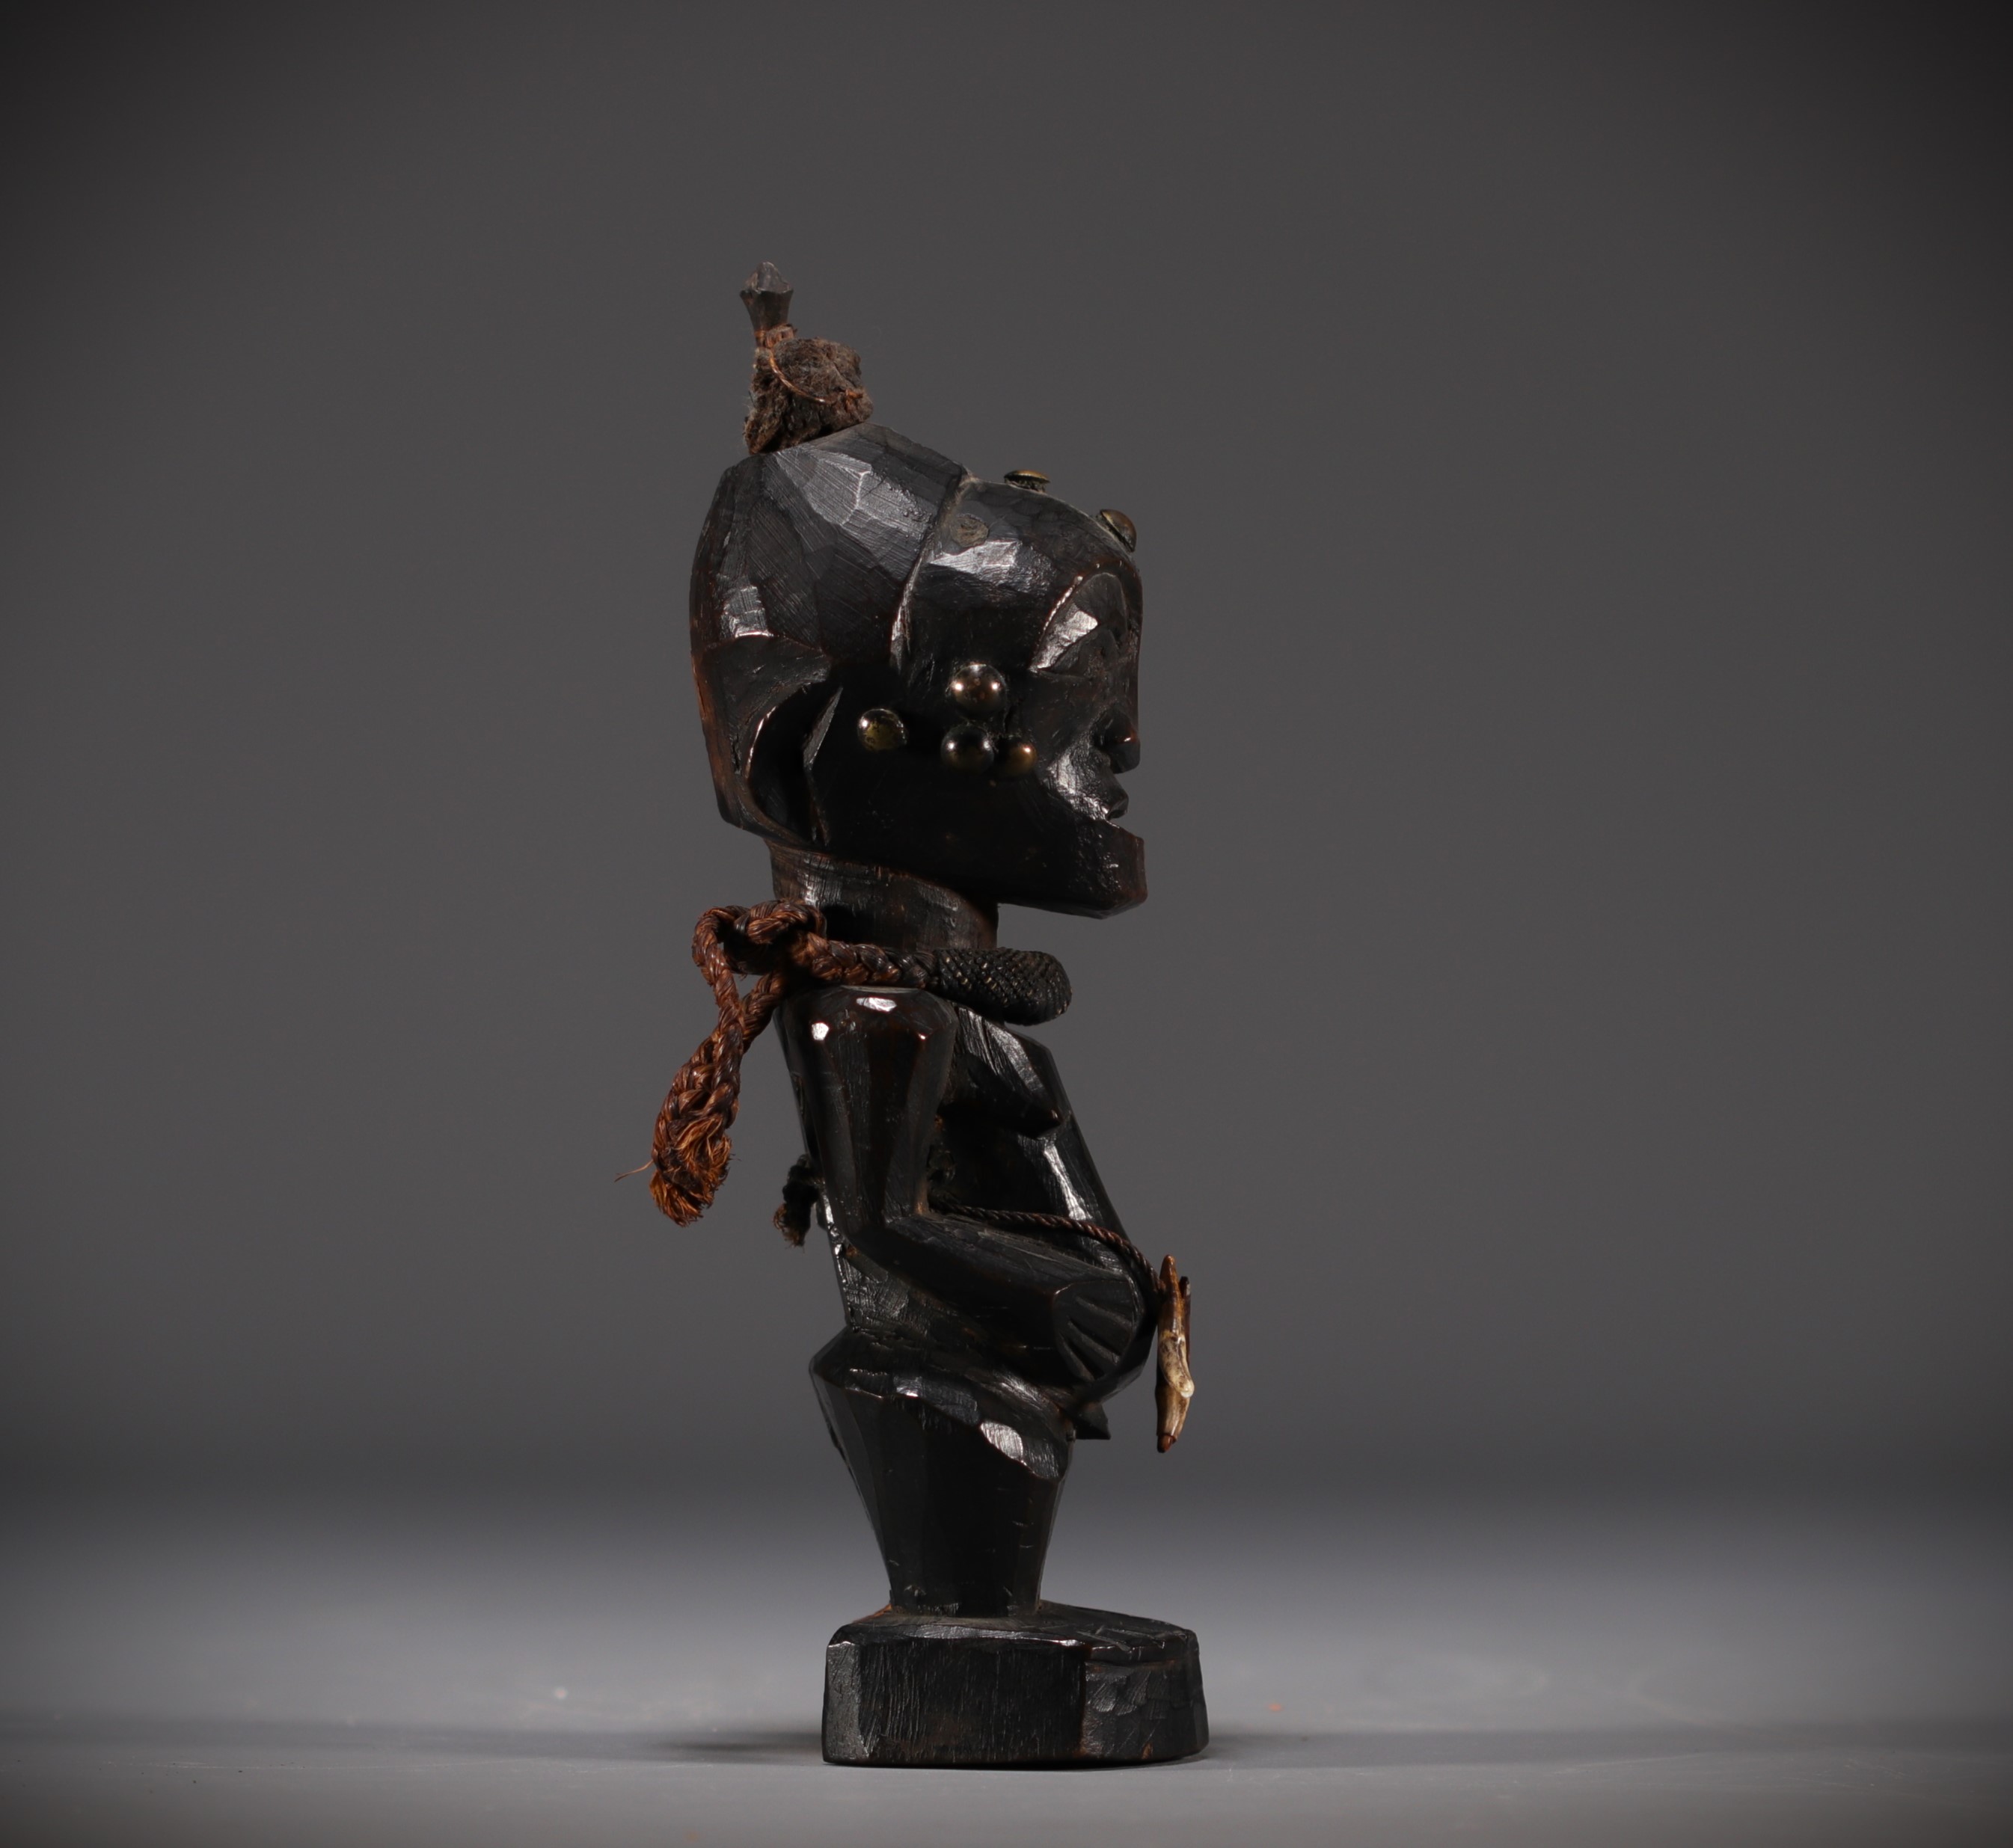 SONGYE ritual figure - collected around 1900 - Rep.Dem.Congo - Image 6 of 7